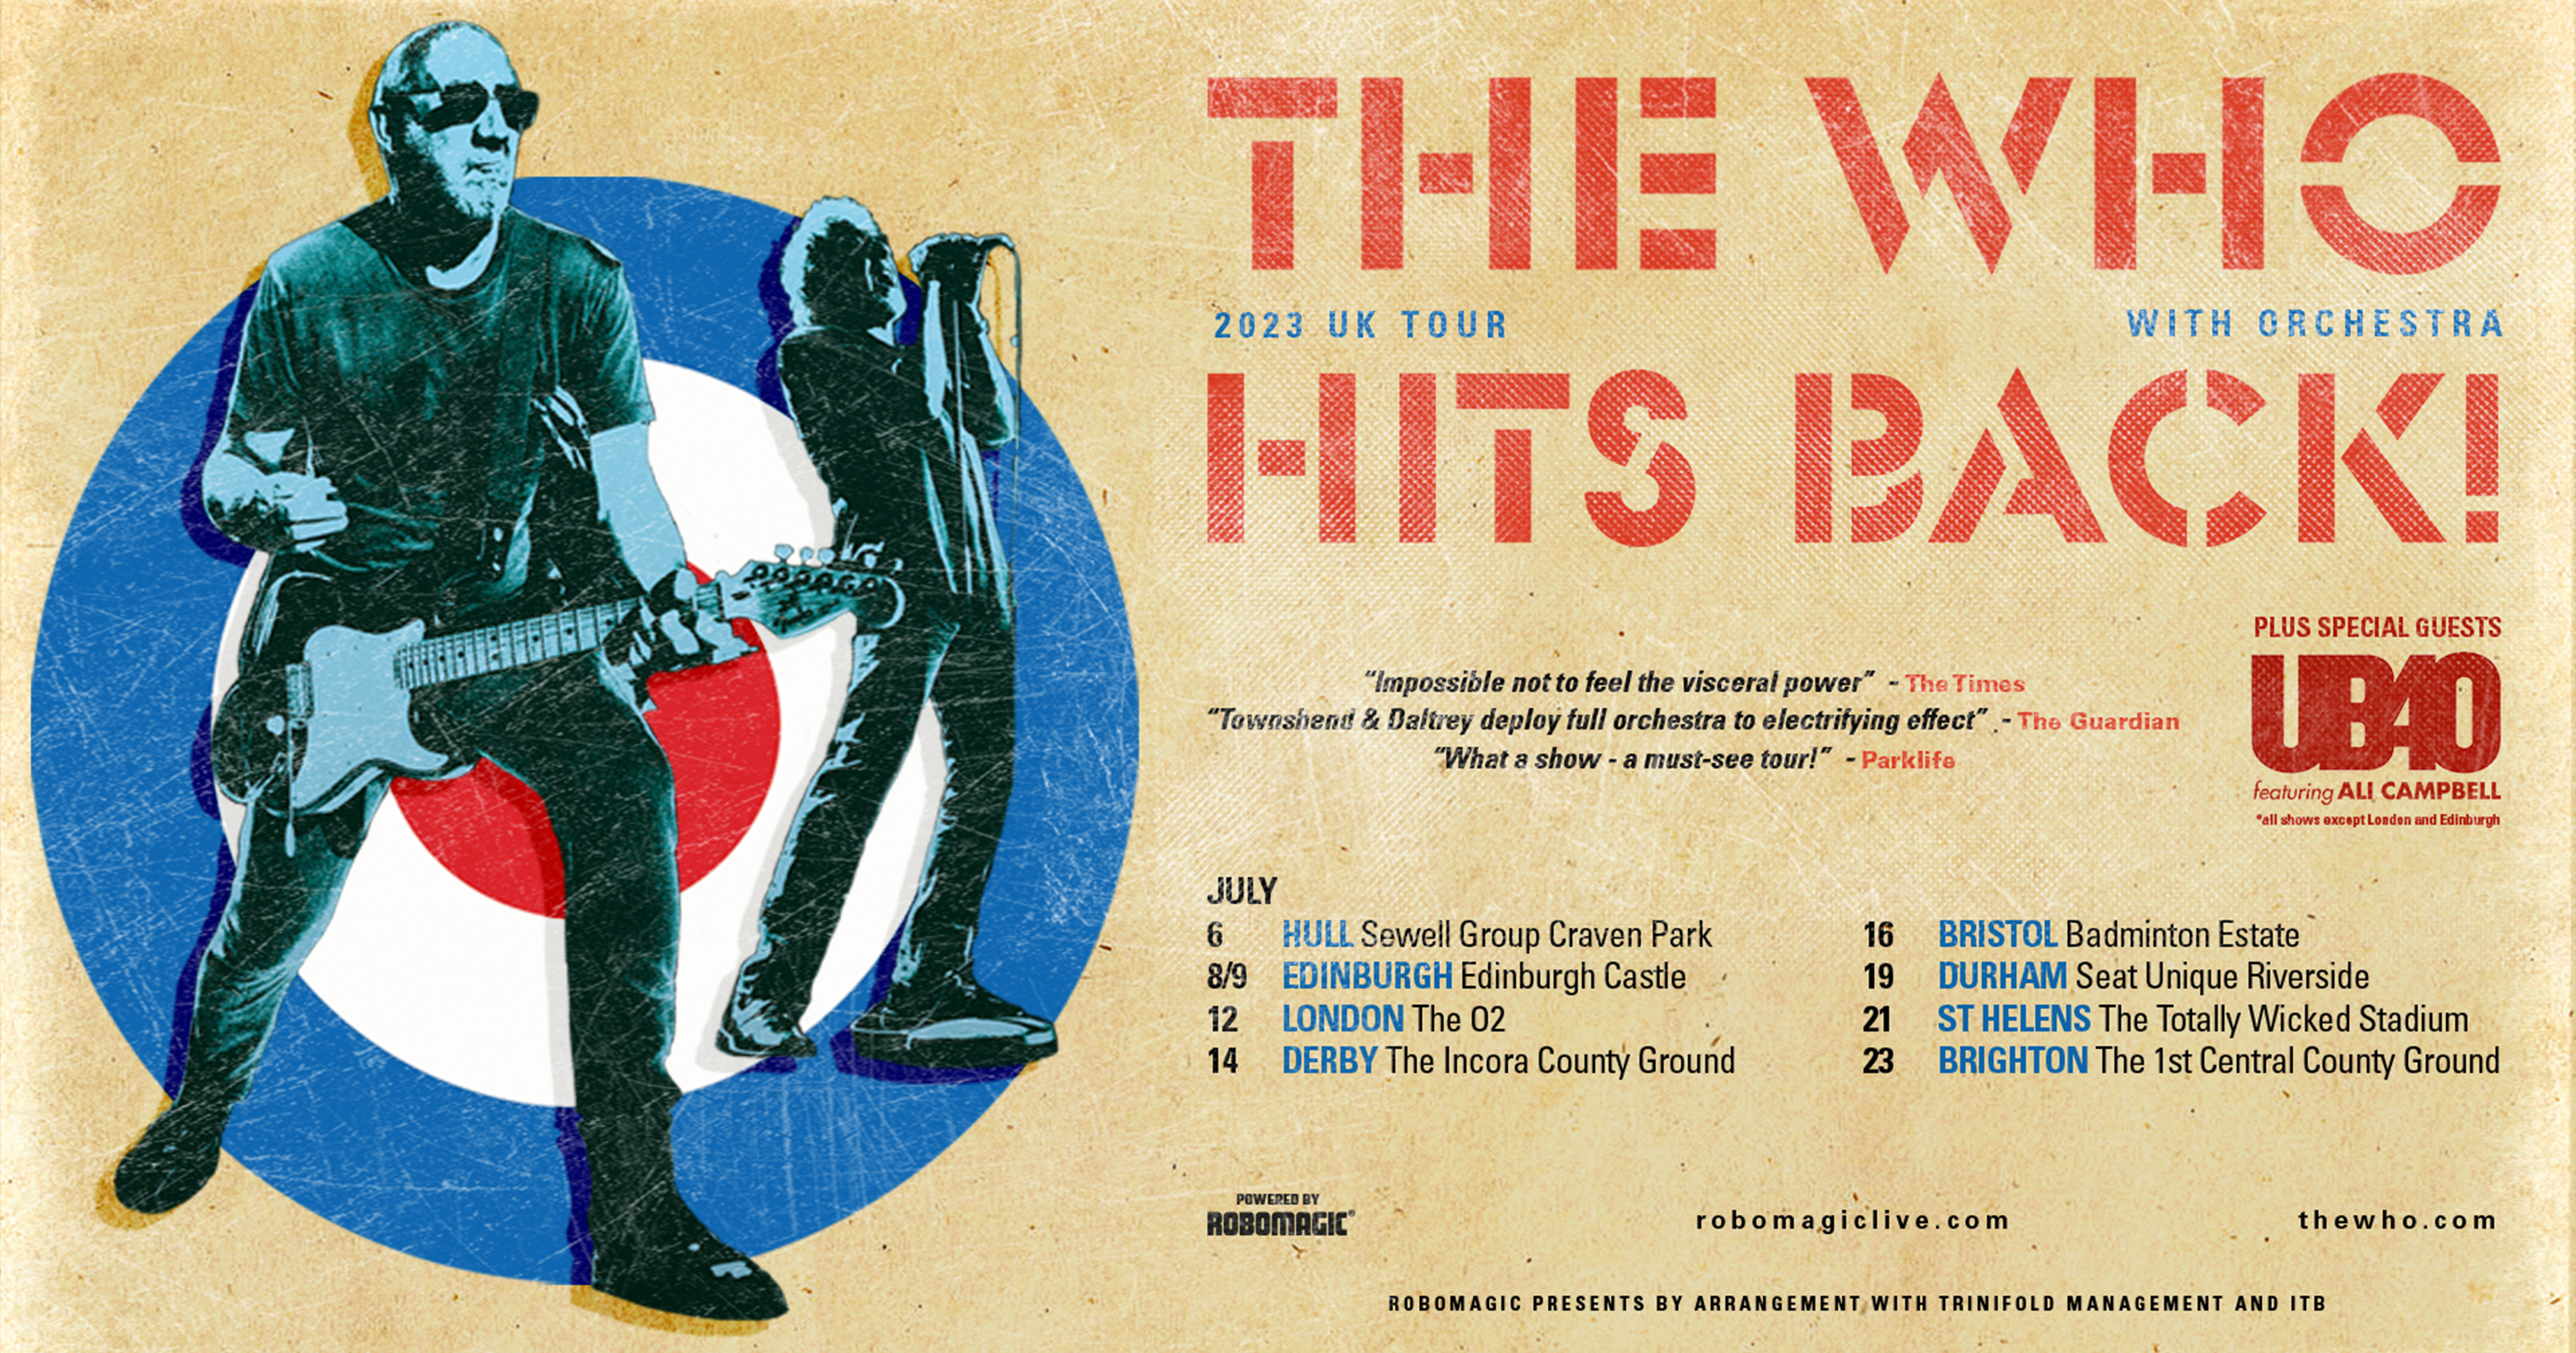 Tour poster for The Who 'The Who Hits Back! Tour' with special guests UB40 featuring Ali Campbell